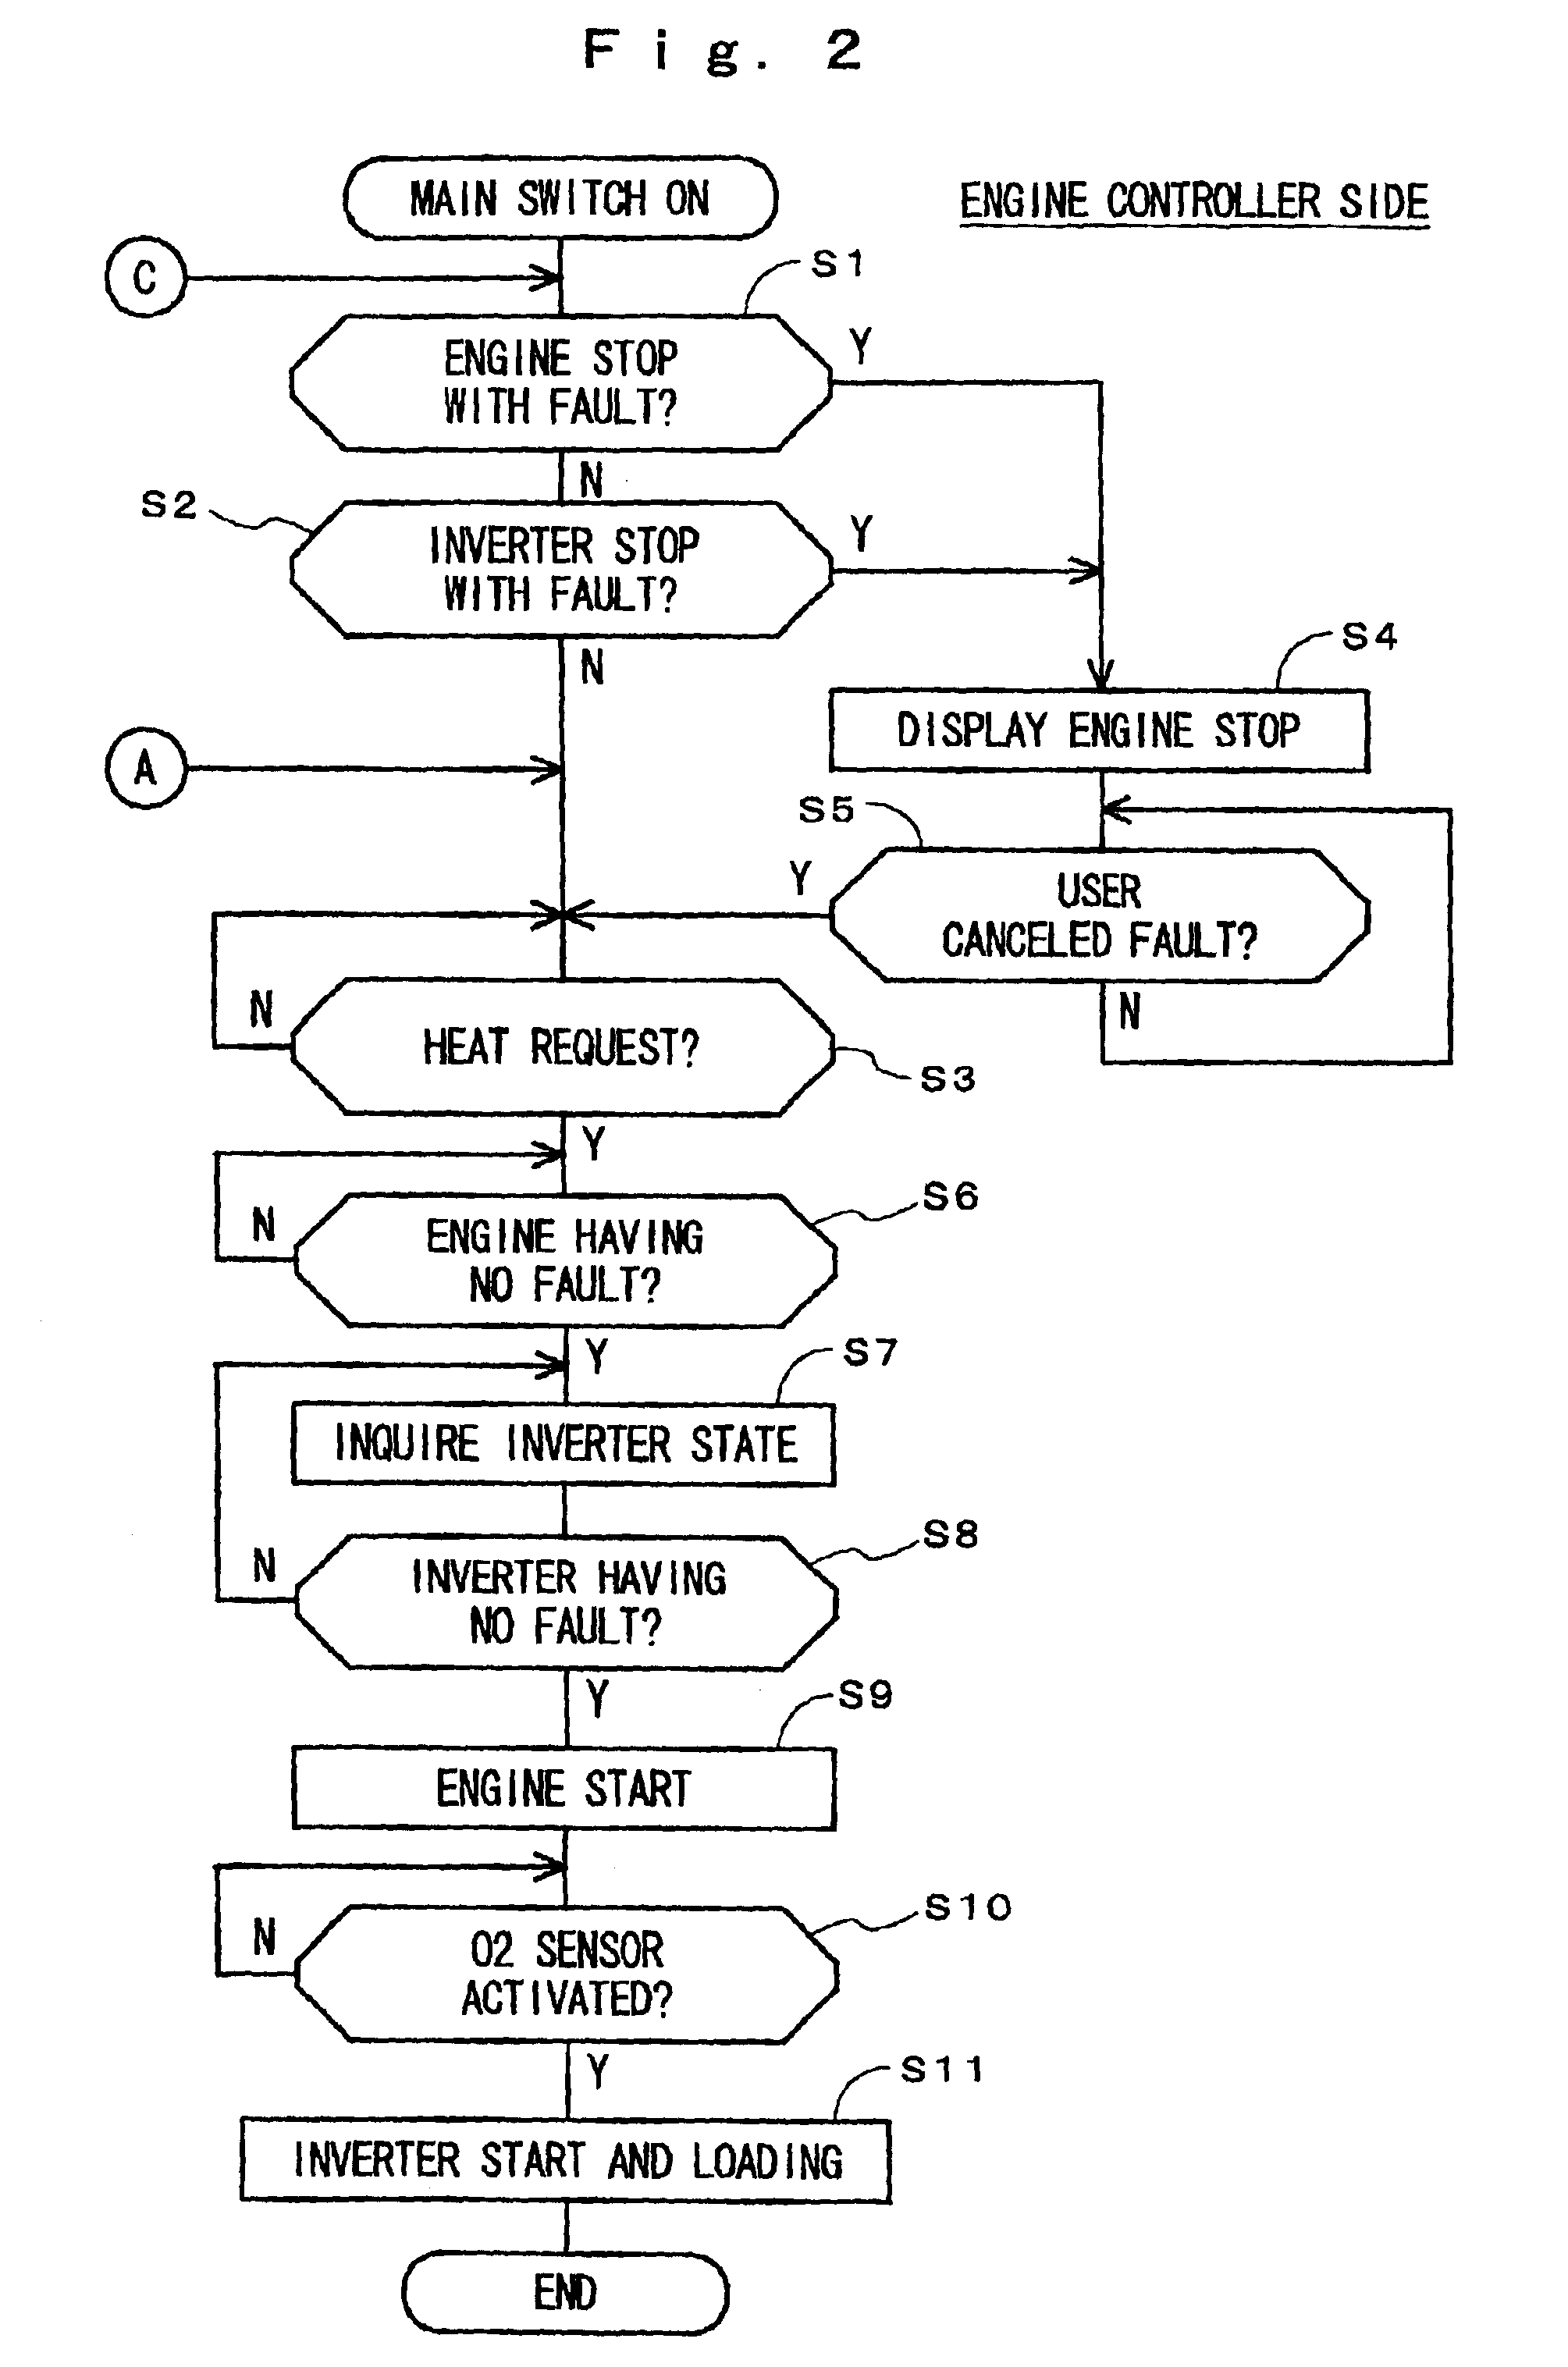 Connection to grid type engine generator apparatus